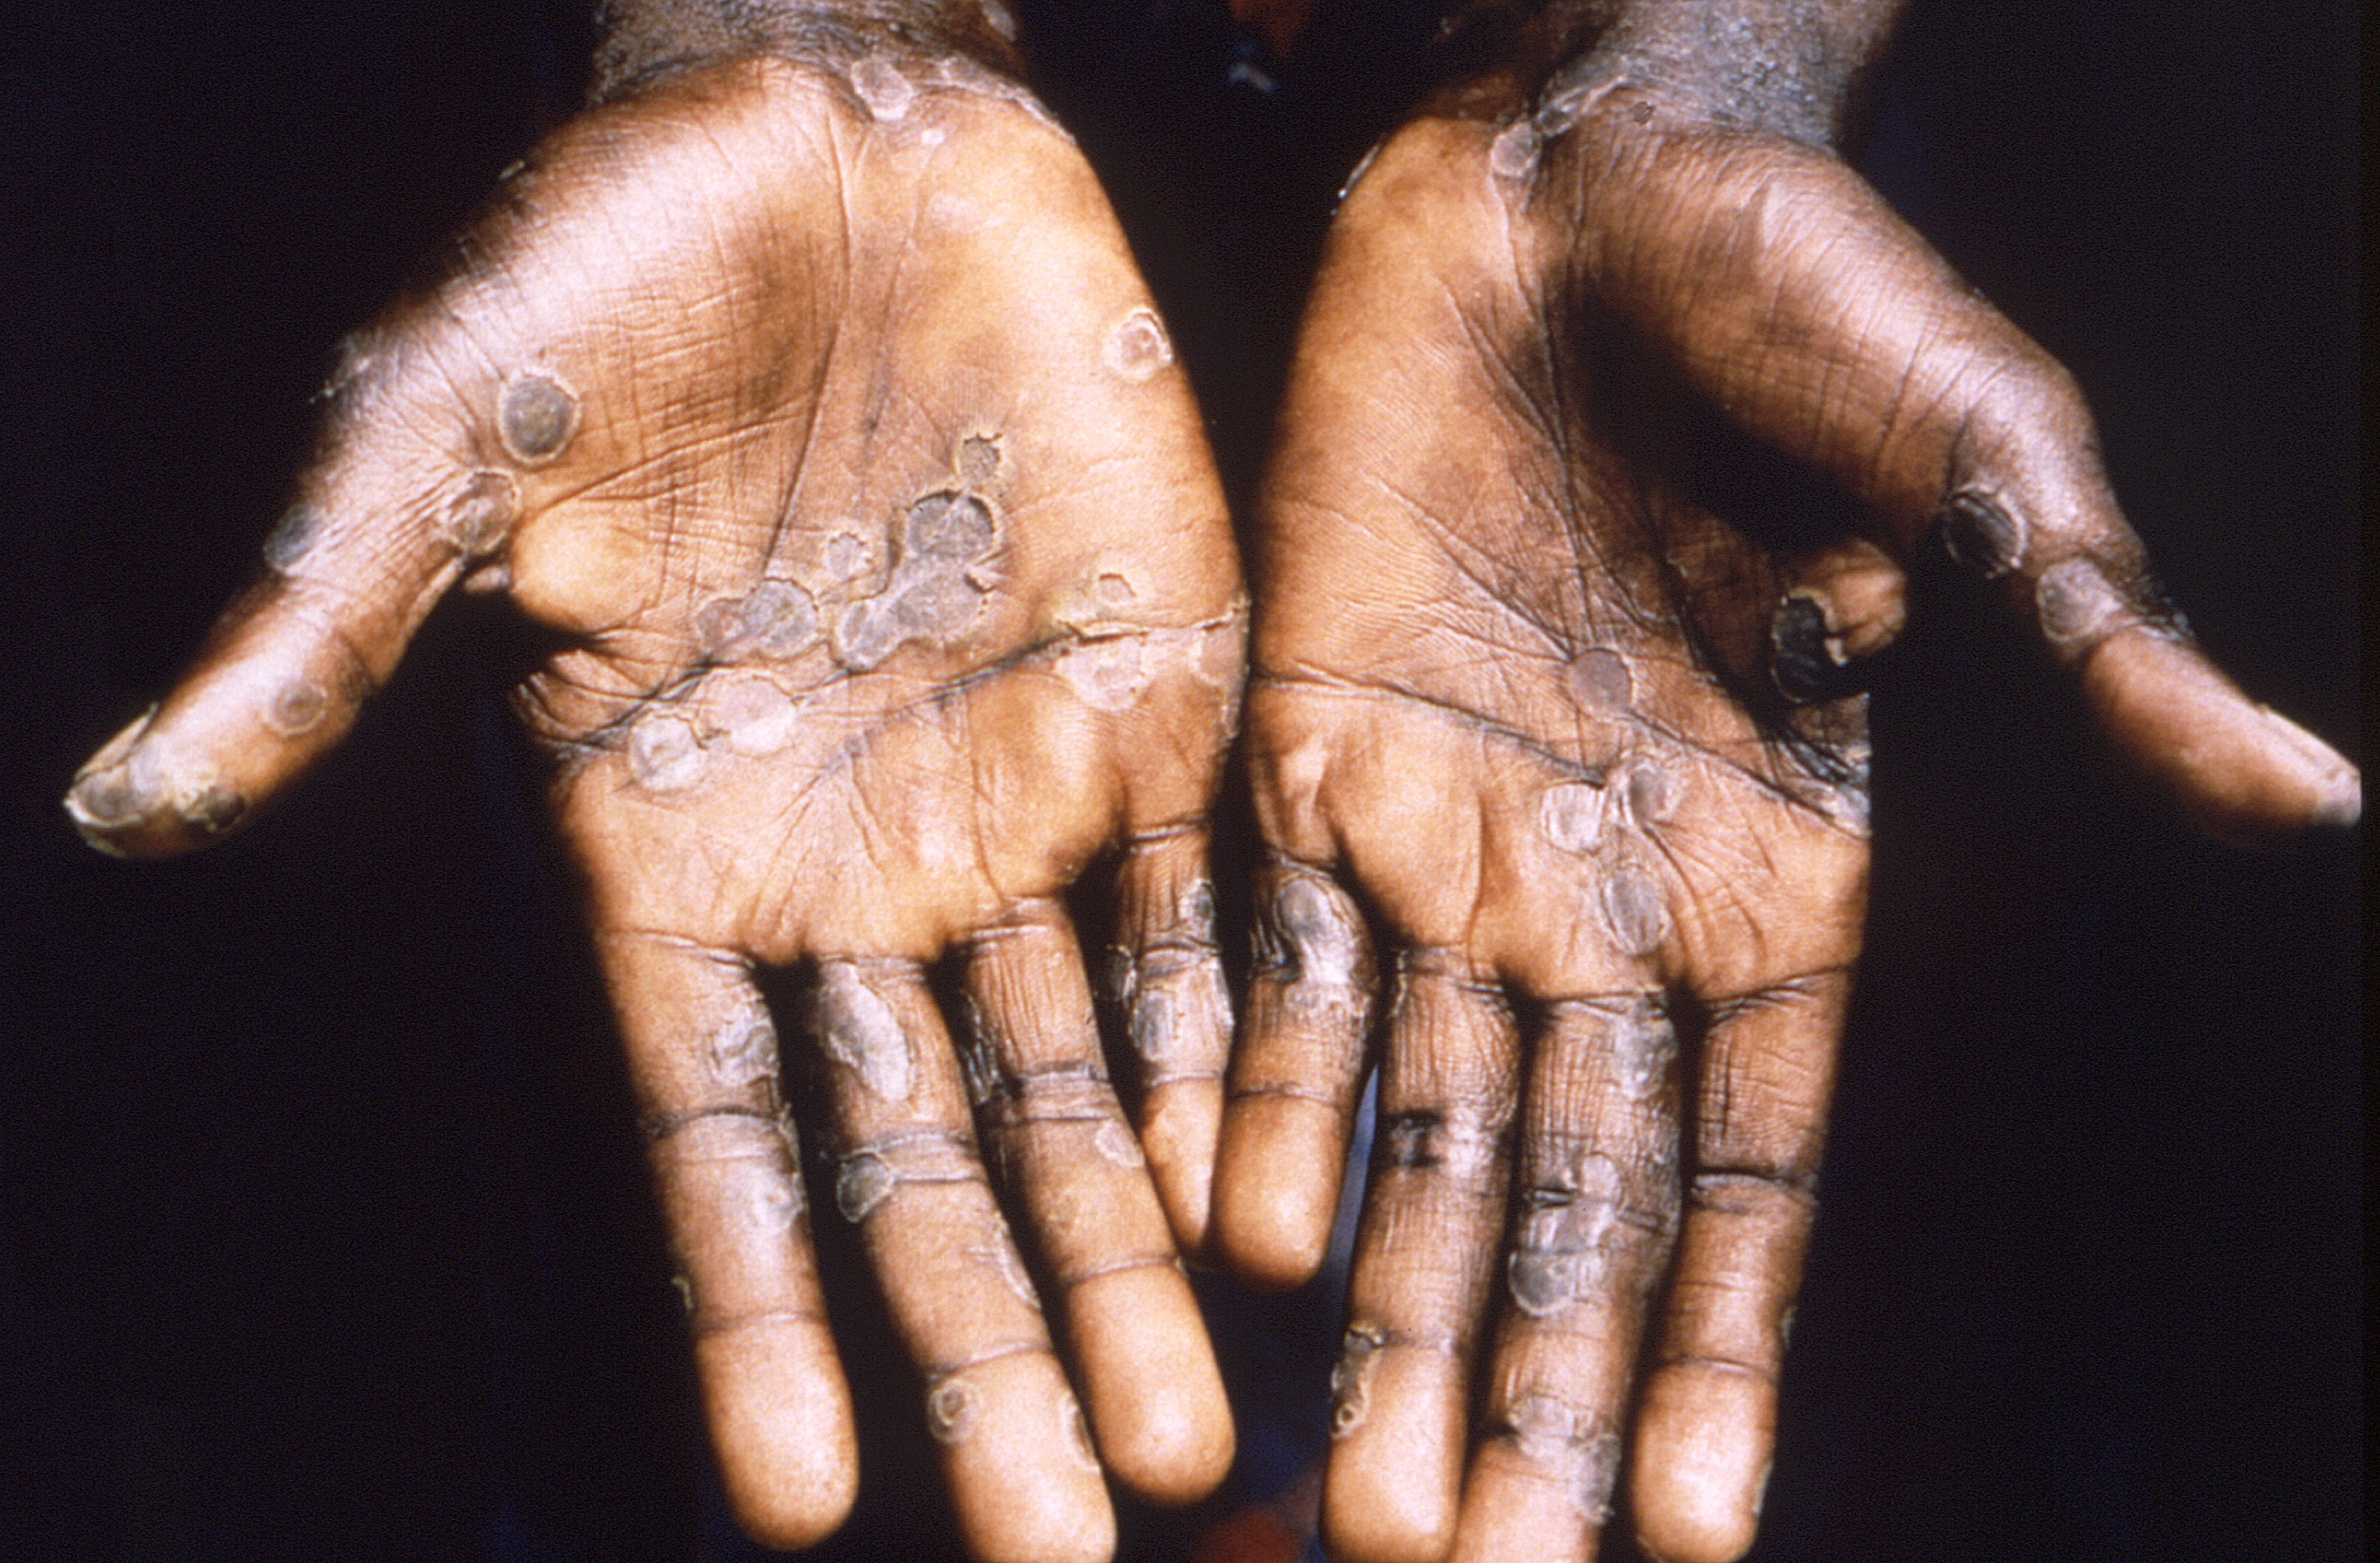 Close-up of a patient's hands, on black background, showing lesions from the monkeypox virus, the Democratic Republic of the Congo, 1997. Courtesy CDC/Mahey et al. (Photo via Smith Collection/Gado/Getty Images)